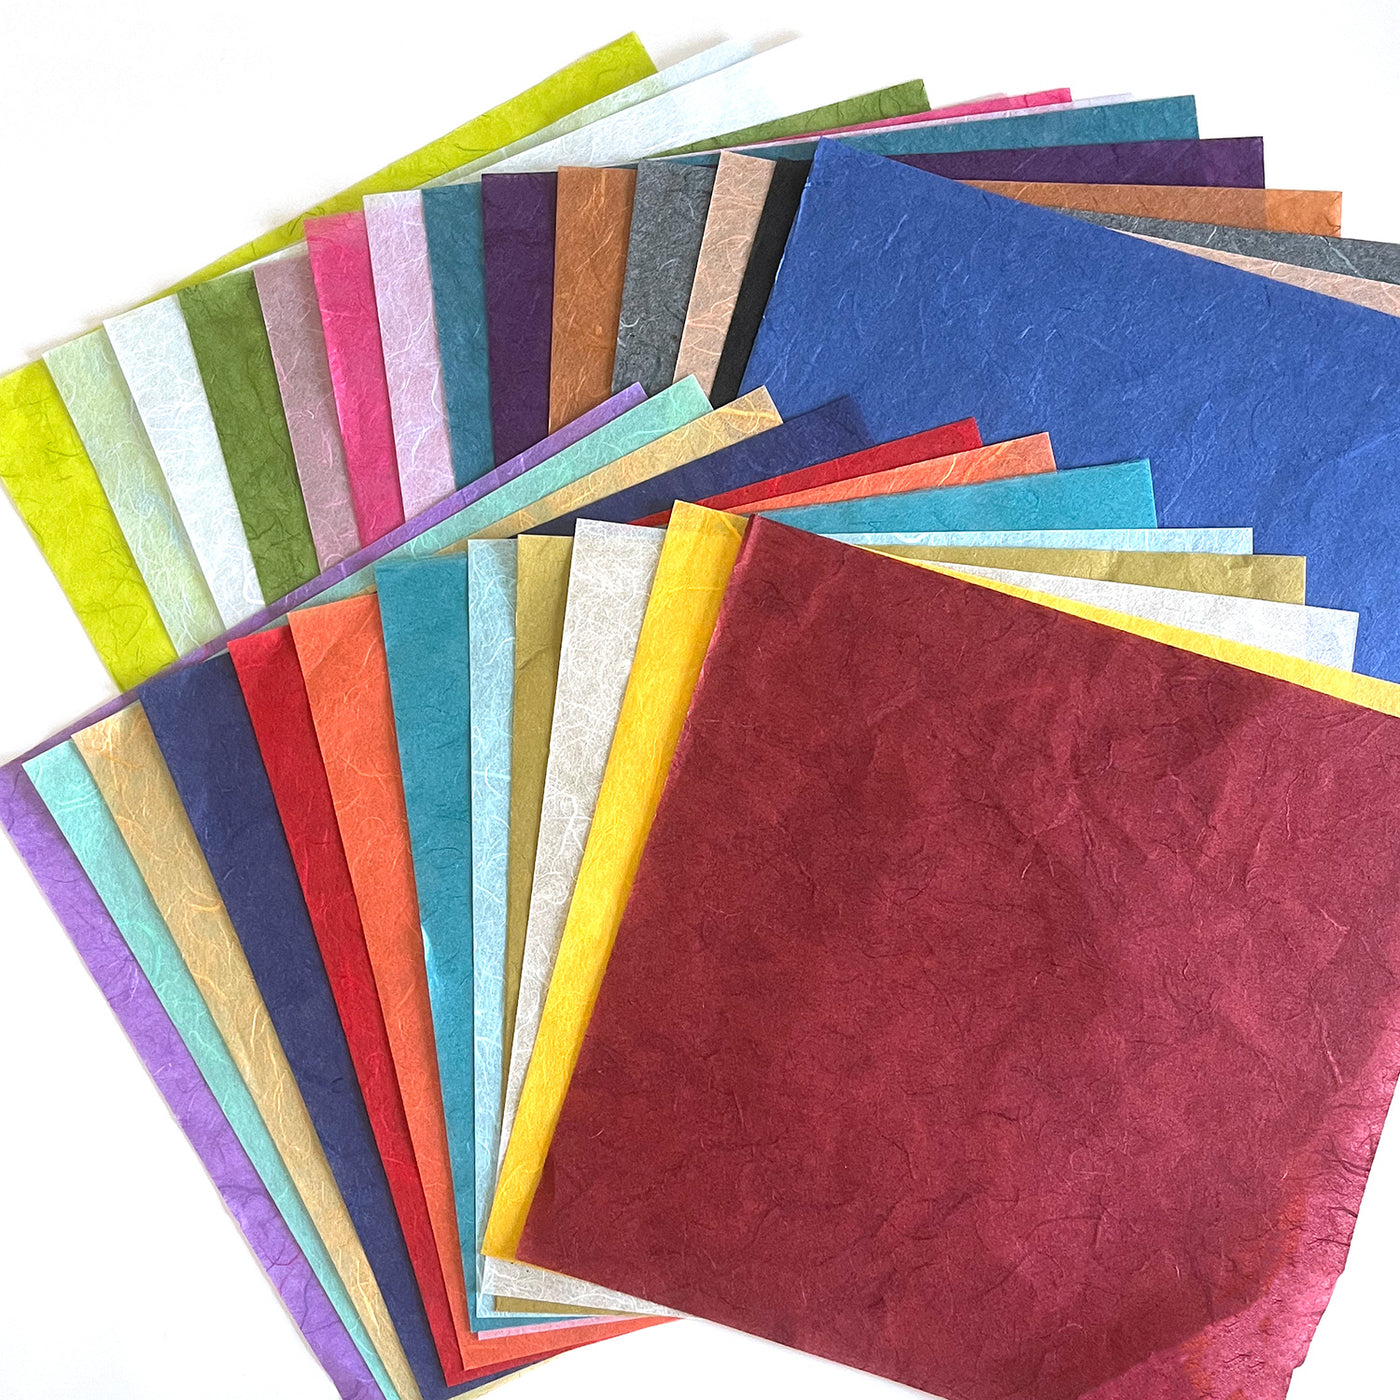 Best Mulberry Paper Sheets for Art and Craft Projects –